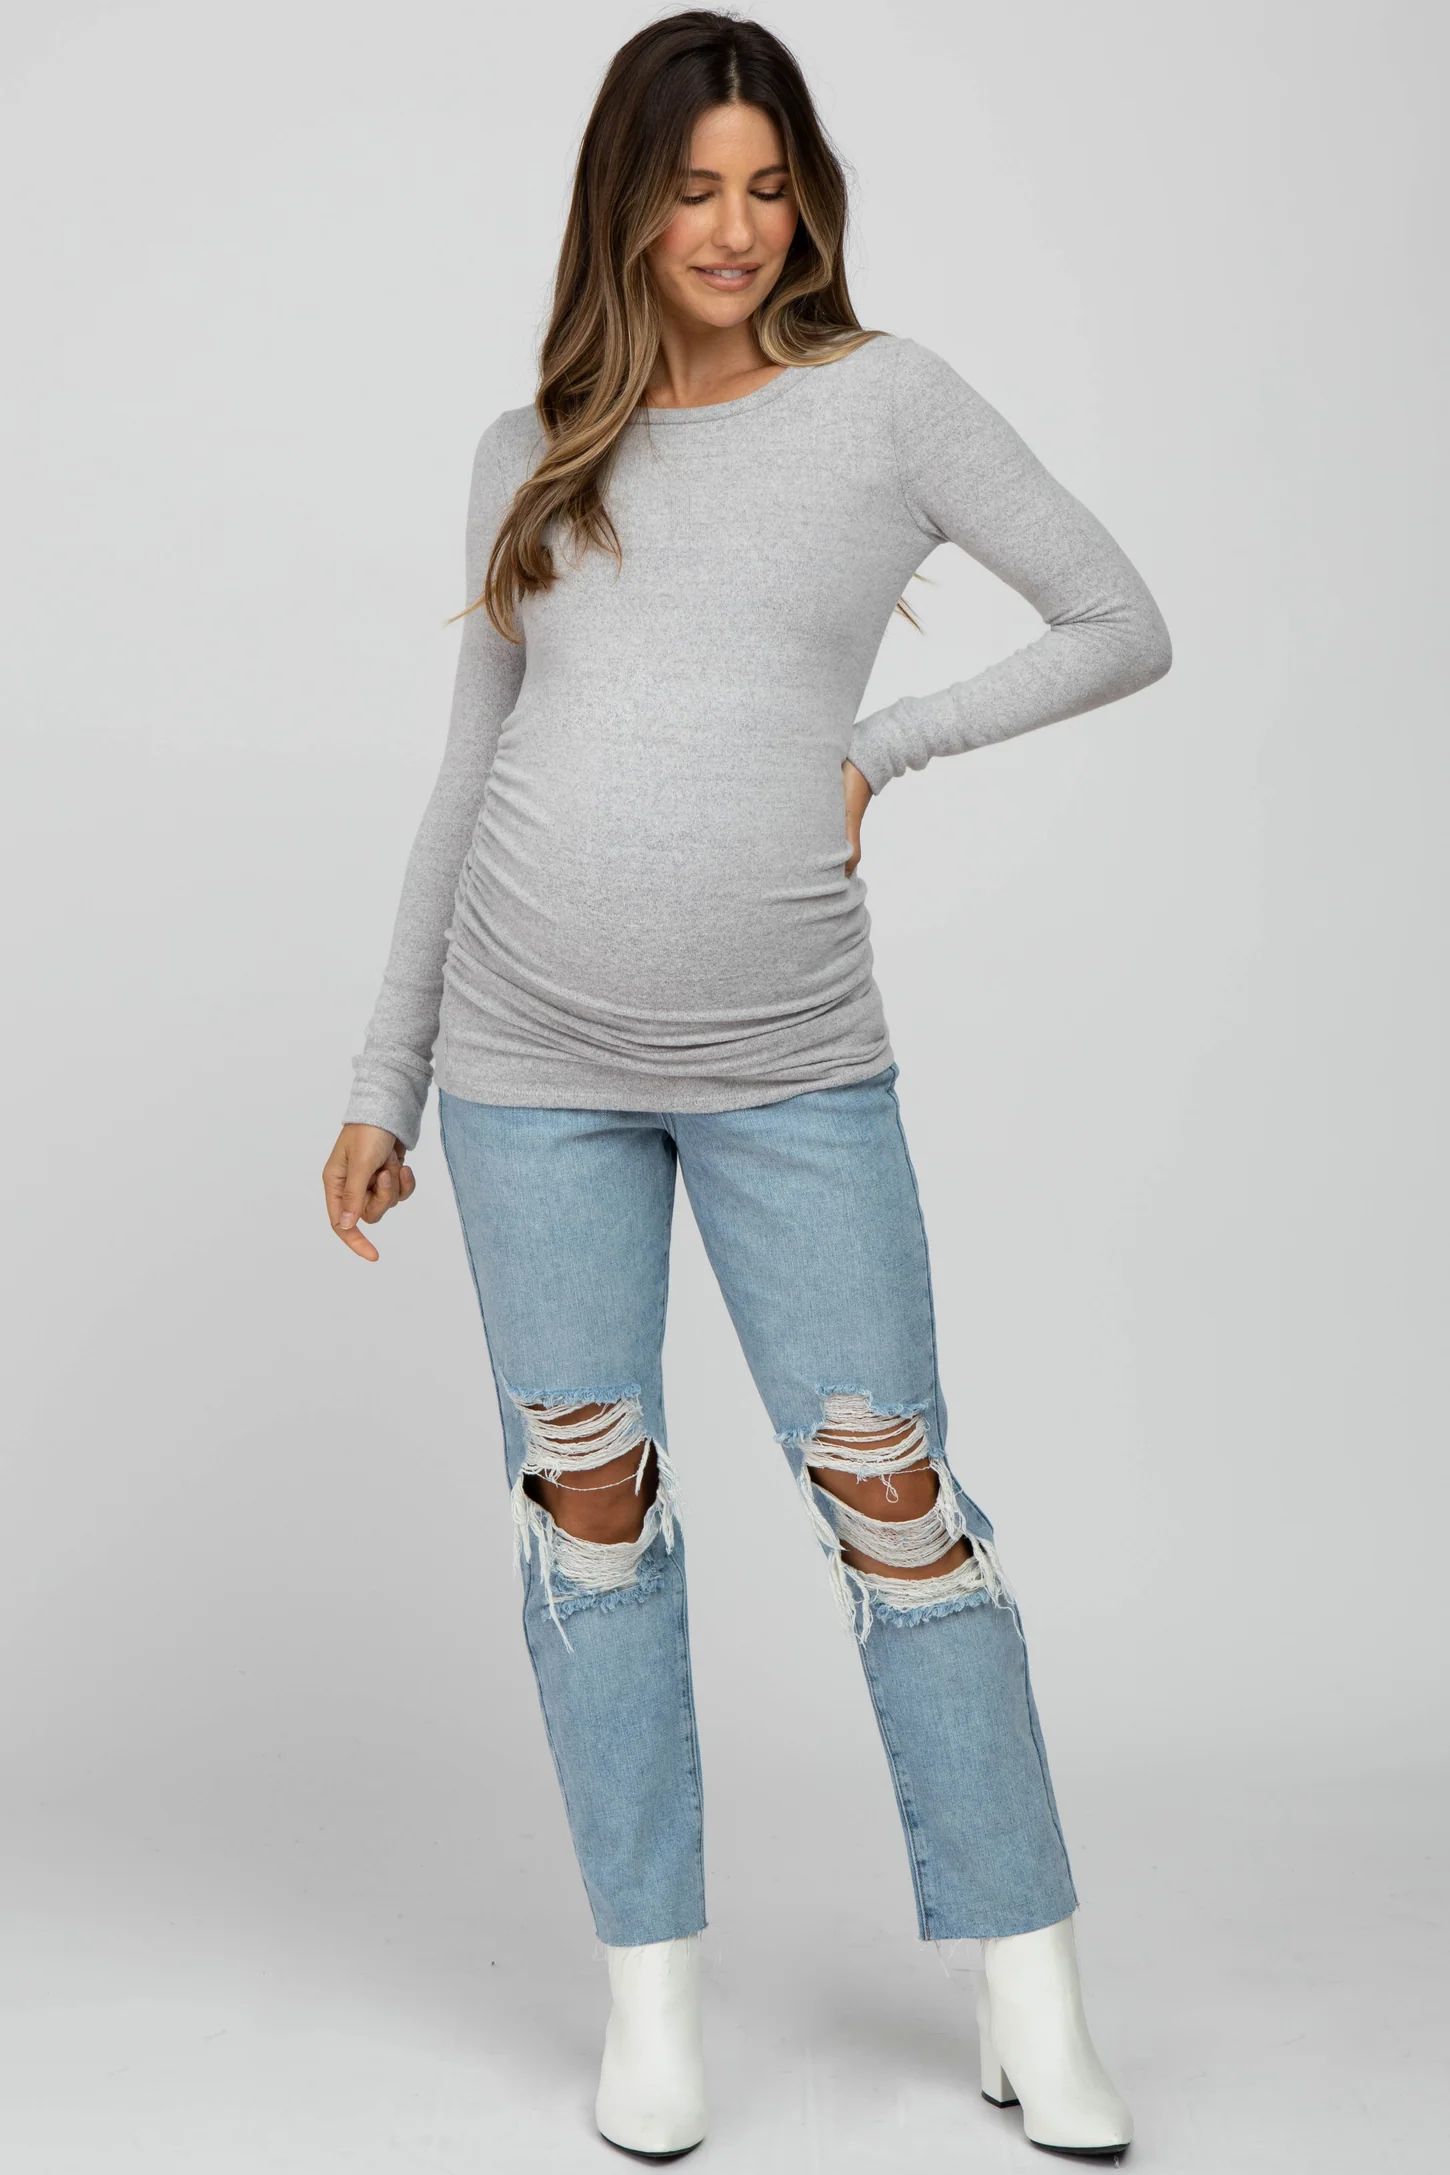 Heather Grey Soft Knit Ruched Maternity Top | PinkBlush Maternity